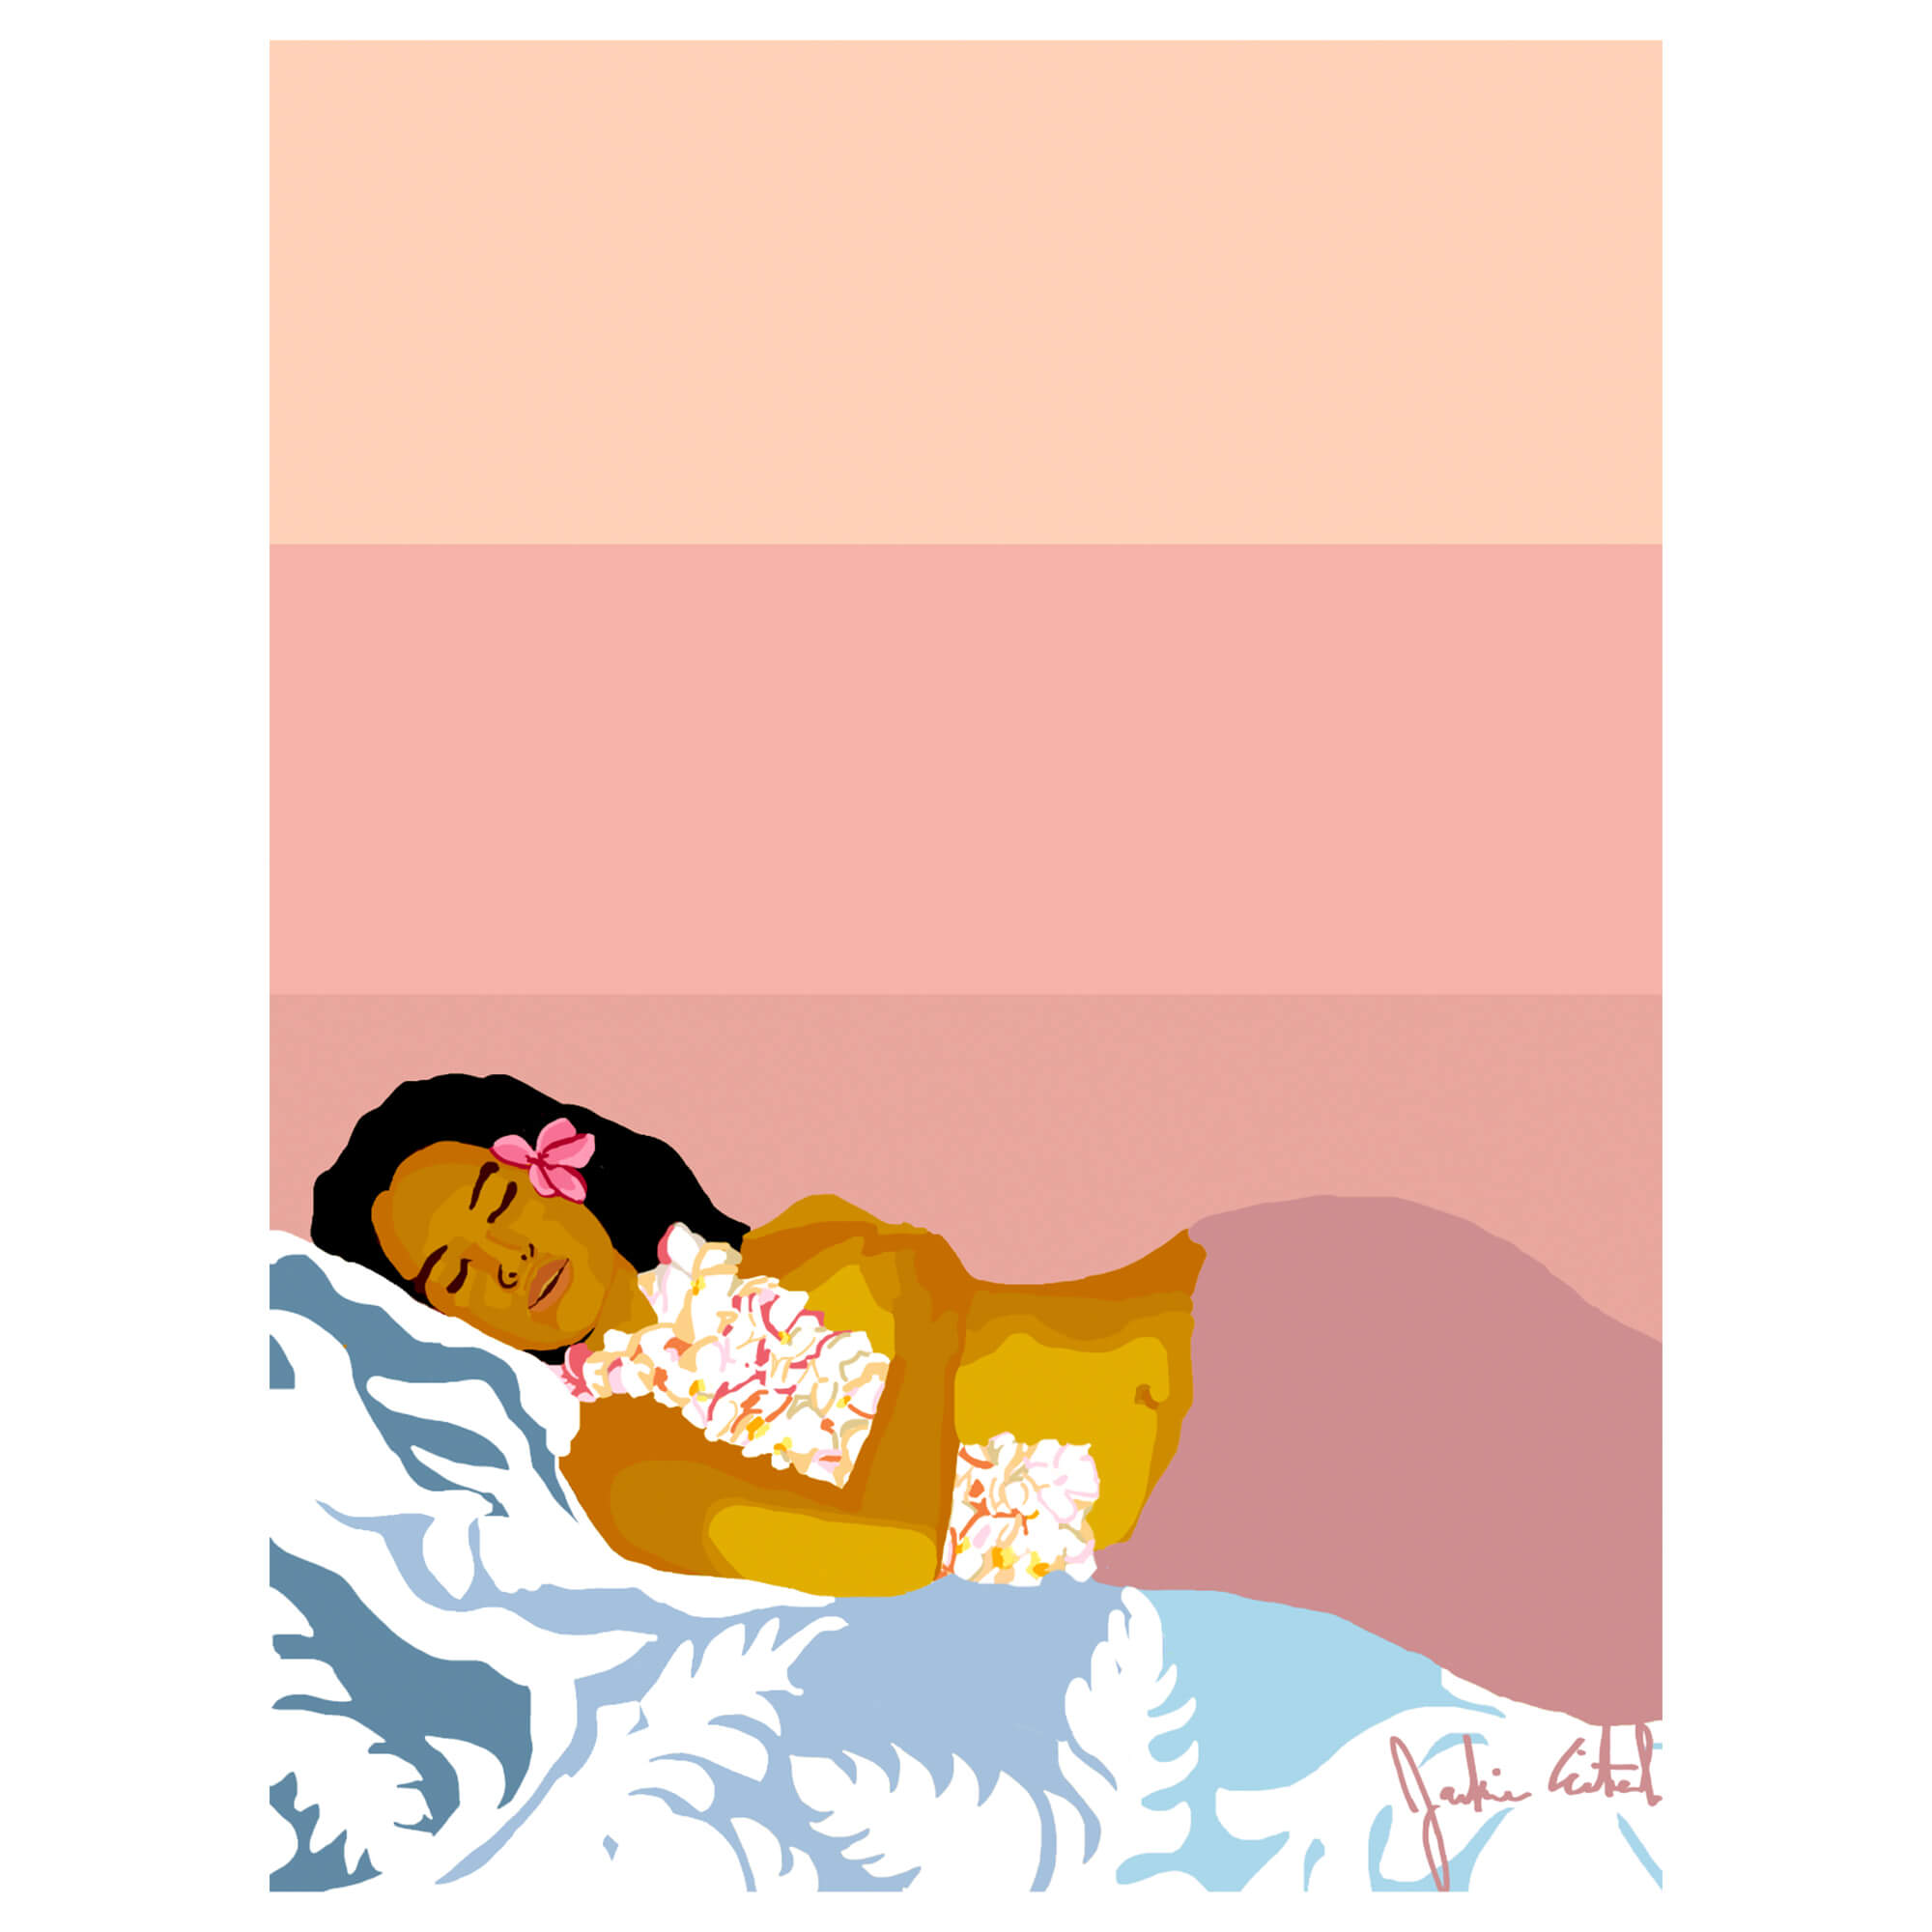 A matted art print featuring a local Hawaiian woman wearing a flower lei while sleeping peacefully by Hawaii artist Jackie Eitel